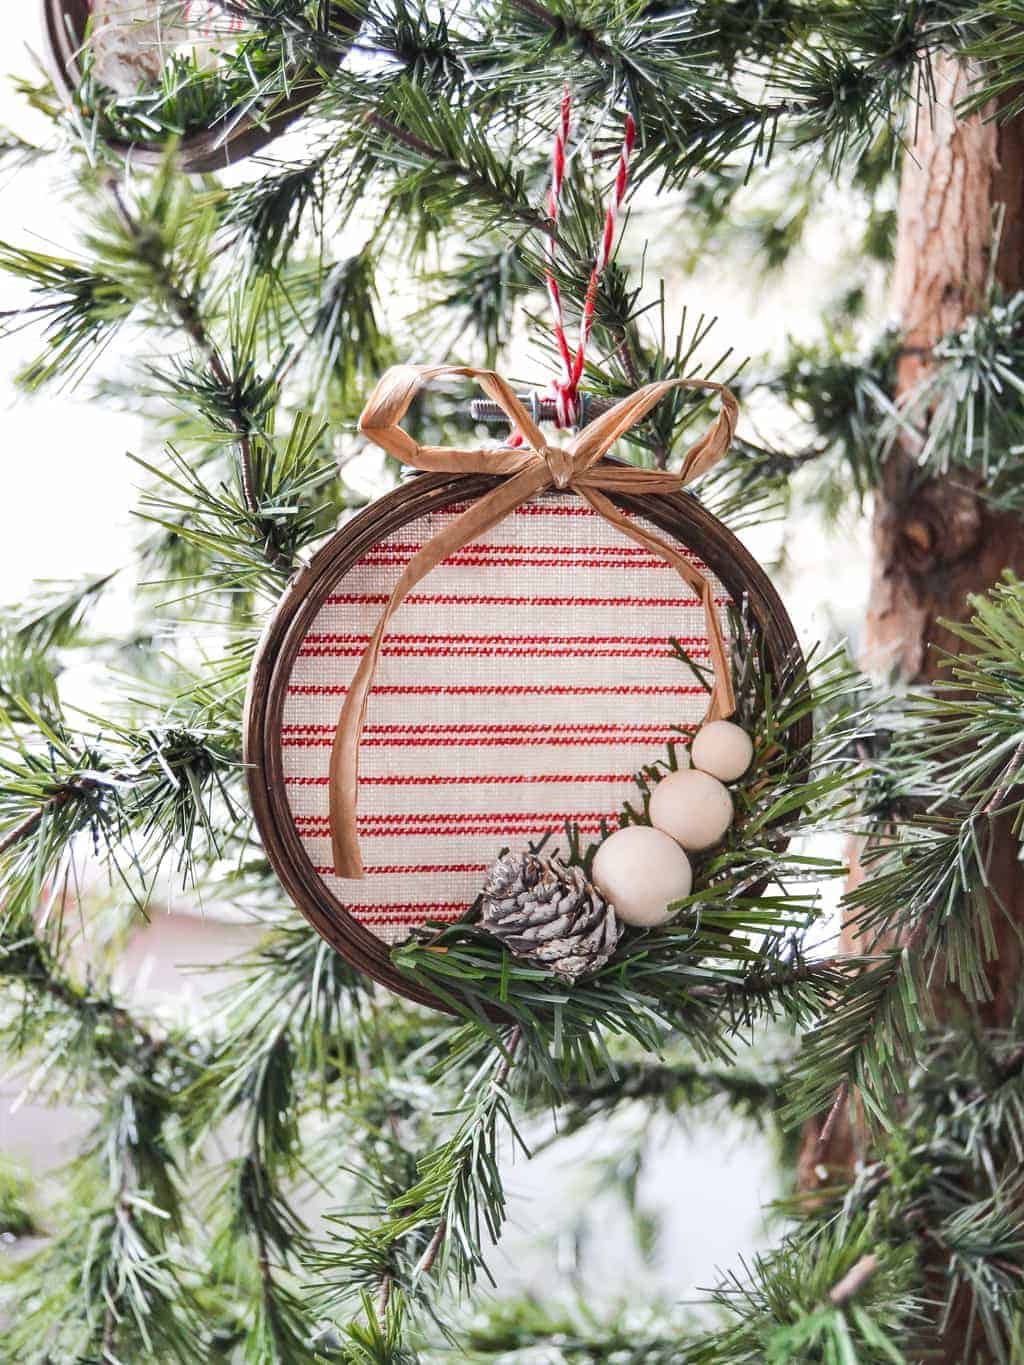 These DIY Christmas ornaments will have you and your family creating baubles for the tree and memories that will last a lifetime.